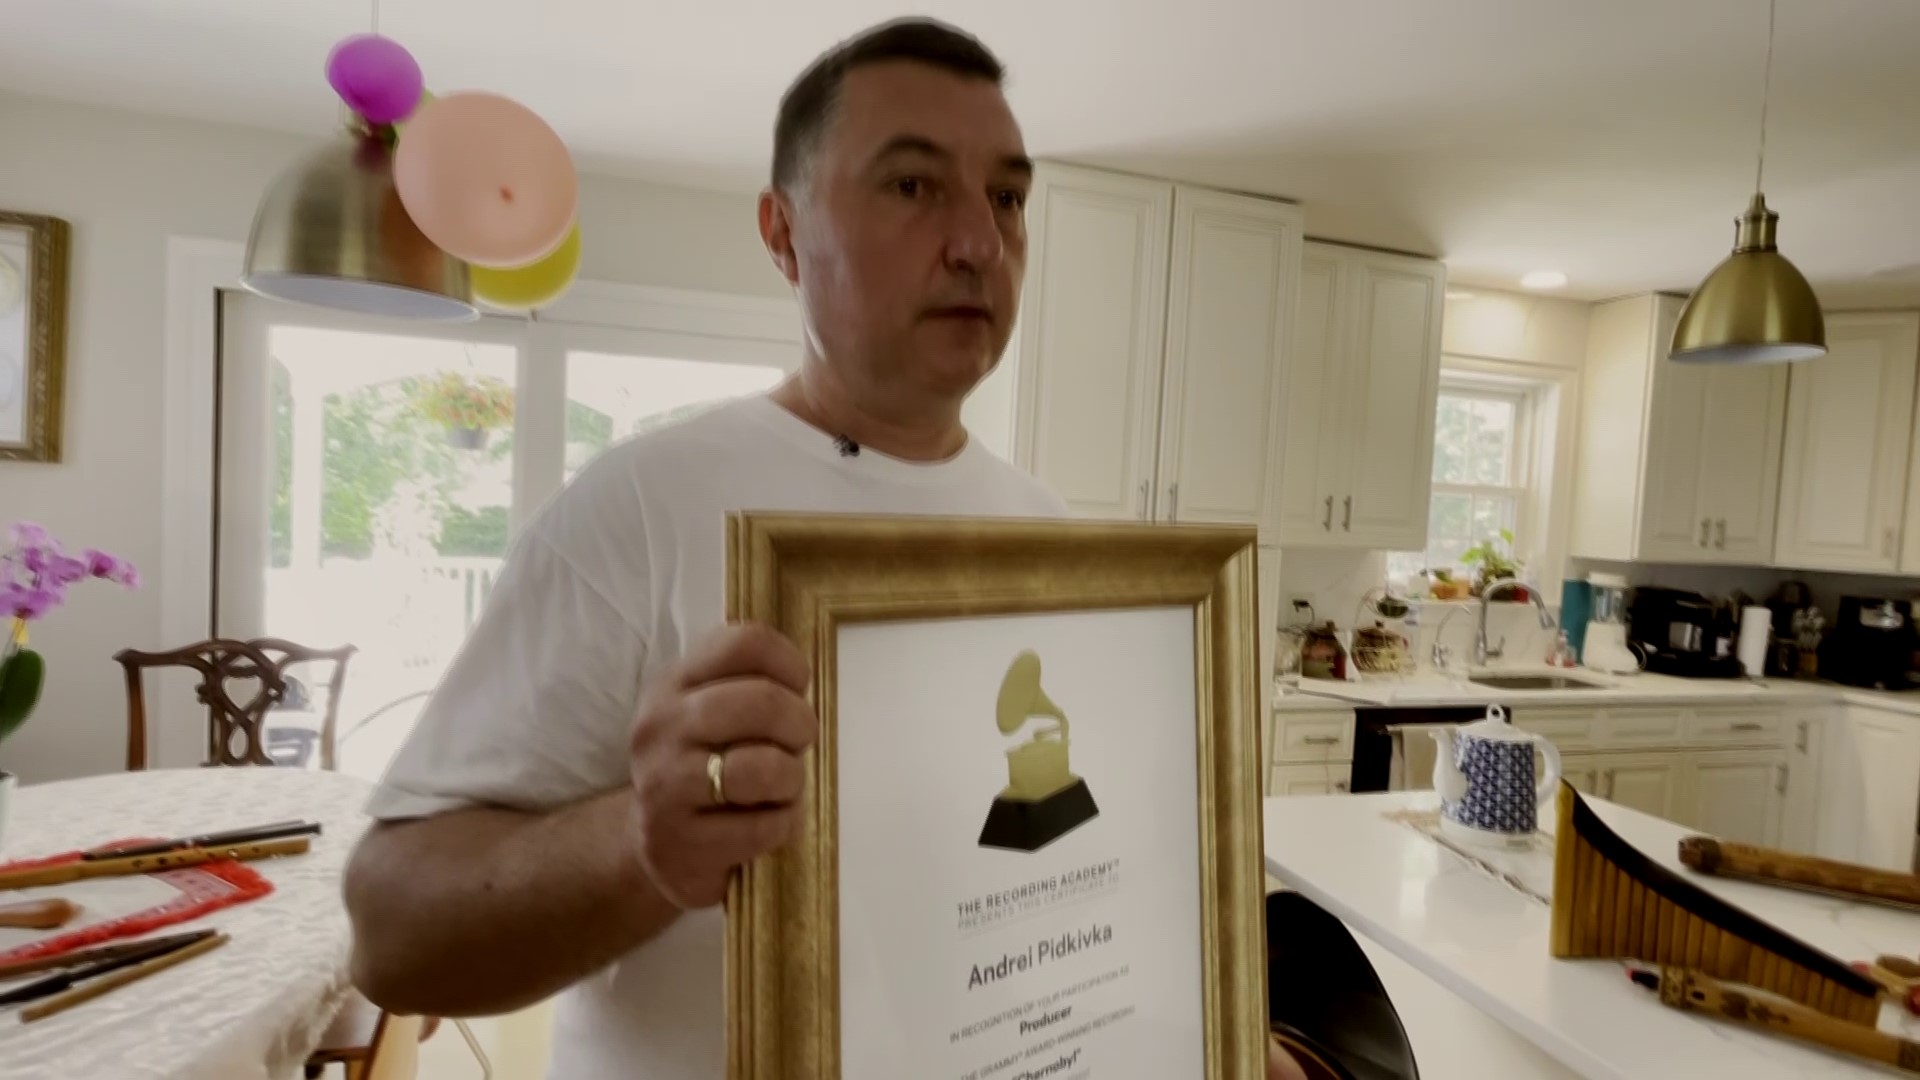 Pidkivka, a musician and producer, talks with Adam Longo about his Grammy for HBO’s ‘Chernobyl’ score and the war in Ukraine.